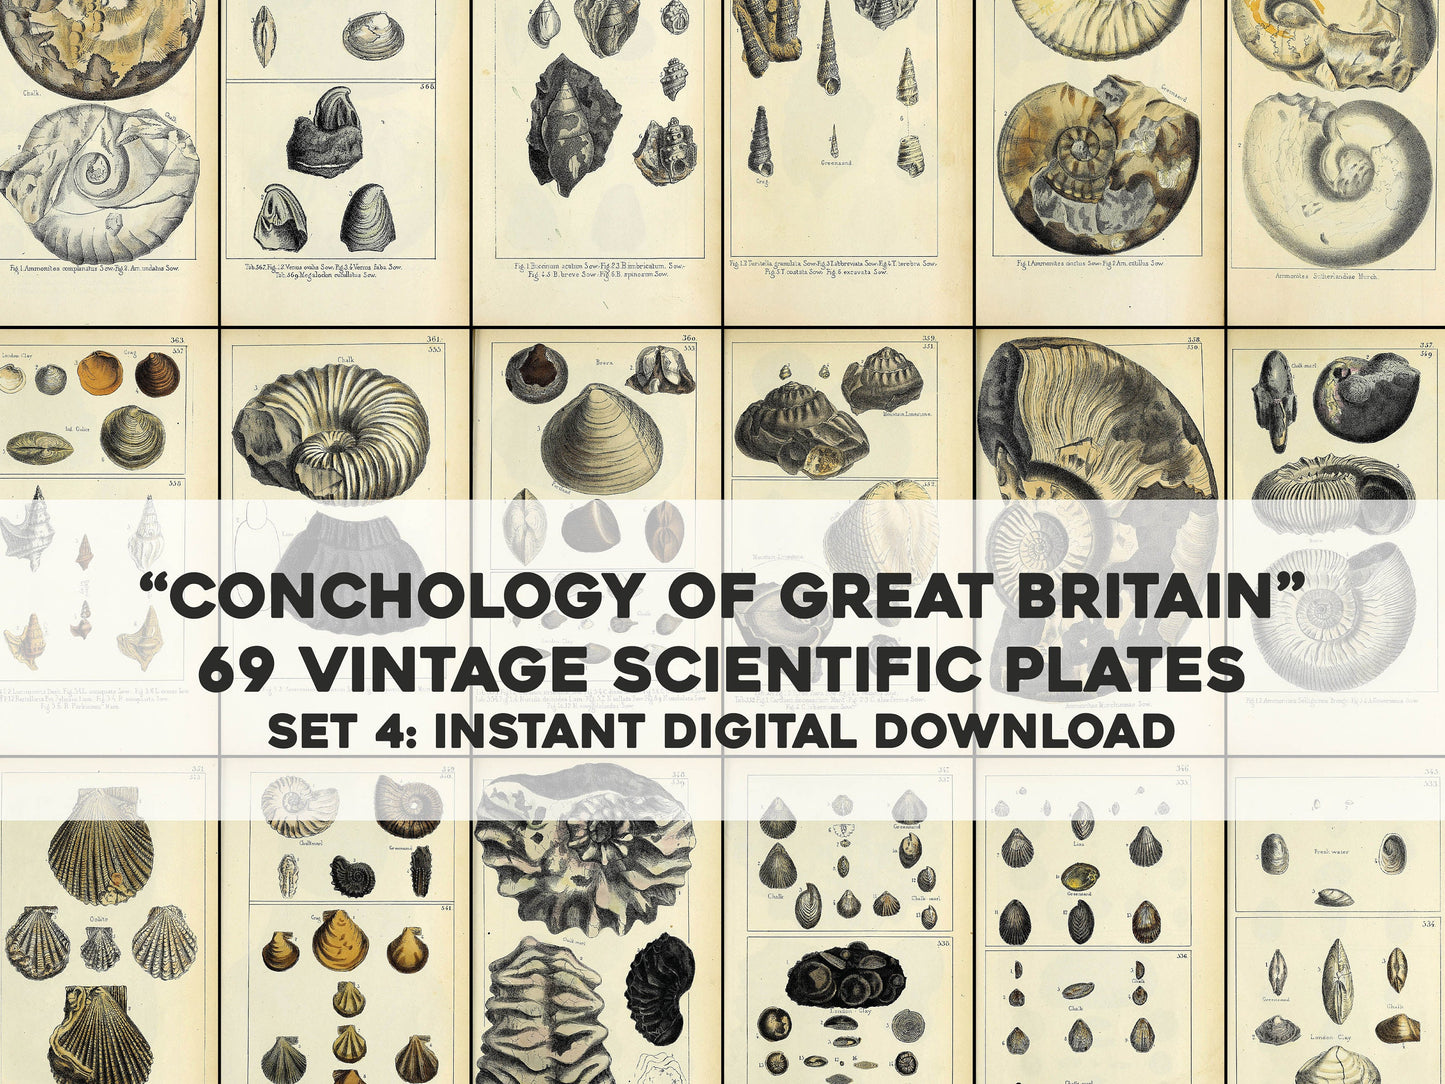 Mineralogical Conchology of Great Britain Set 4 [69 Images]